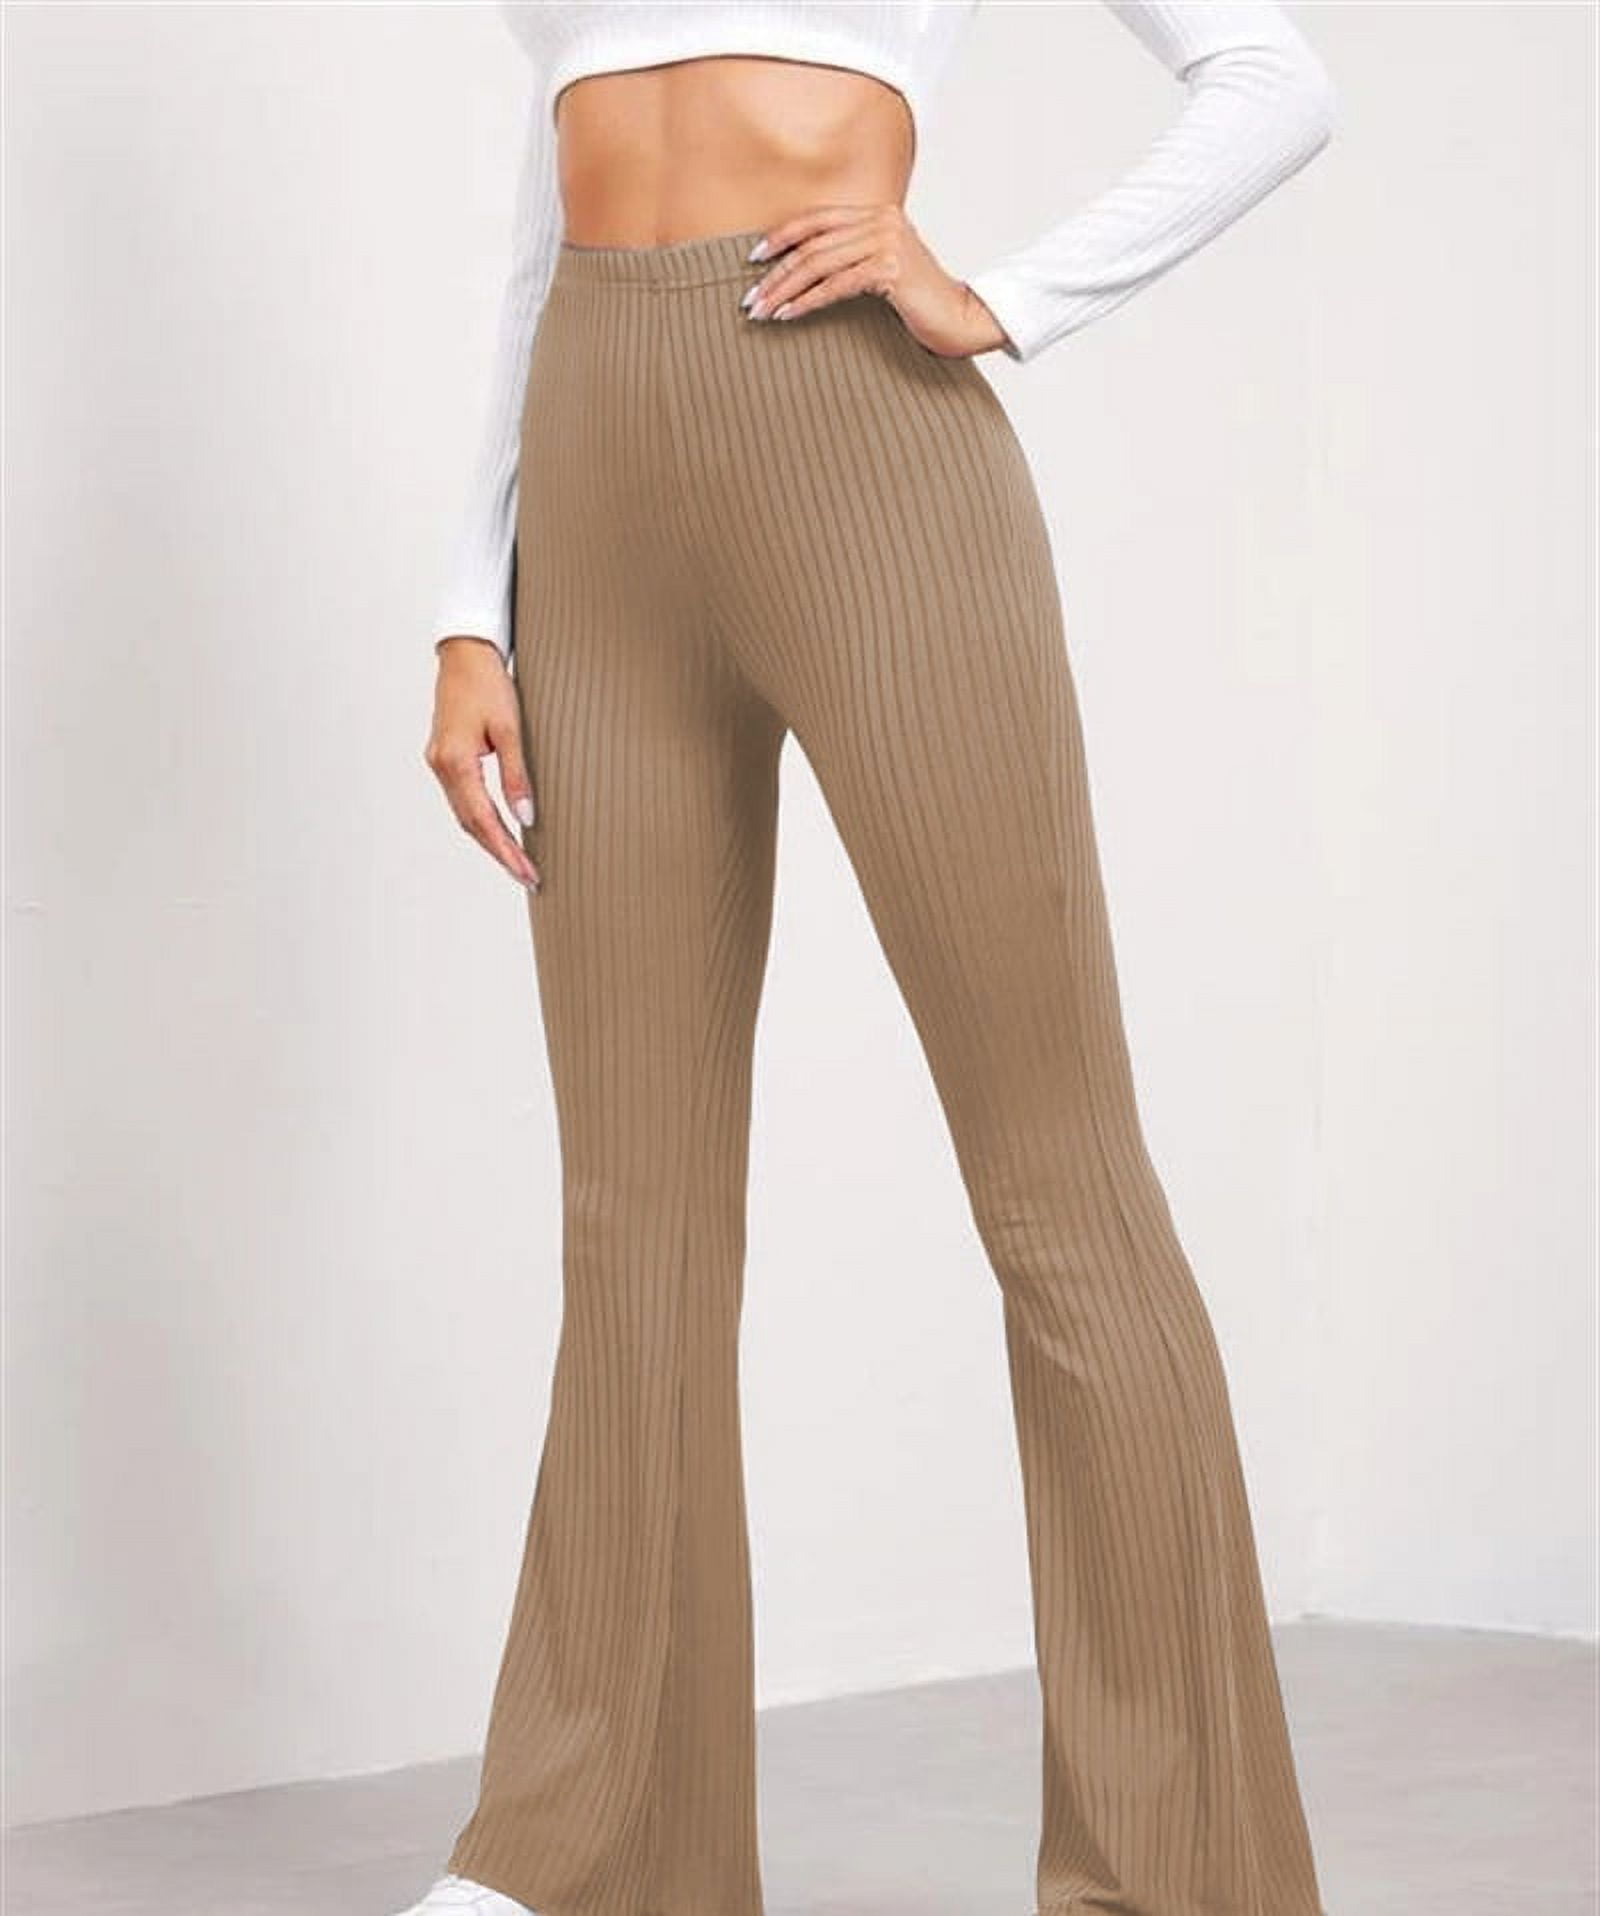 High-Waist Elastic Waistband Control Tummy Lady Trousers Women Solid Color  Sports Flared Lady Slim Stretchy